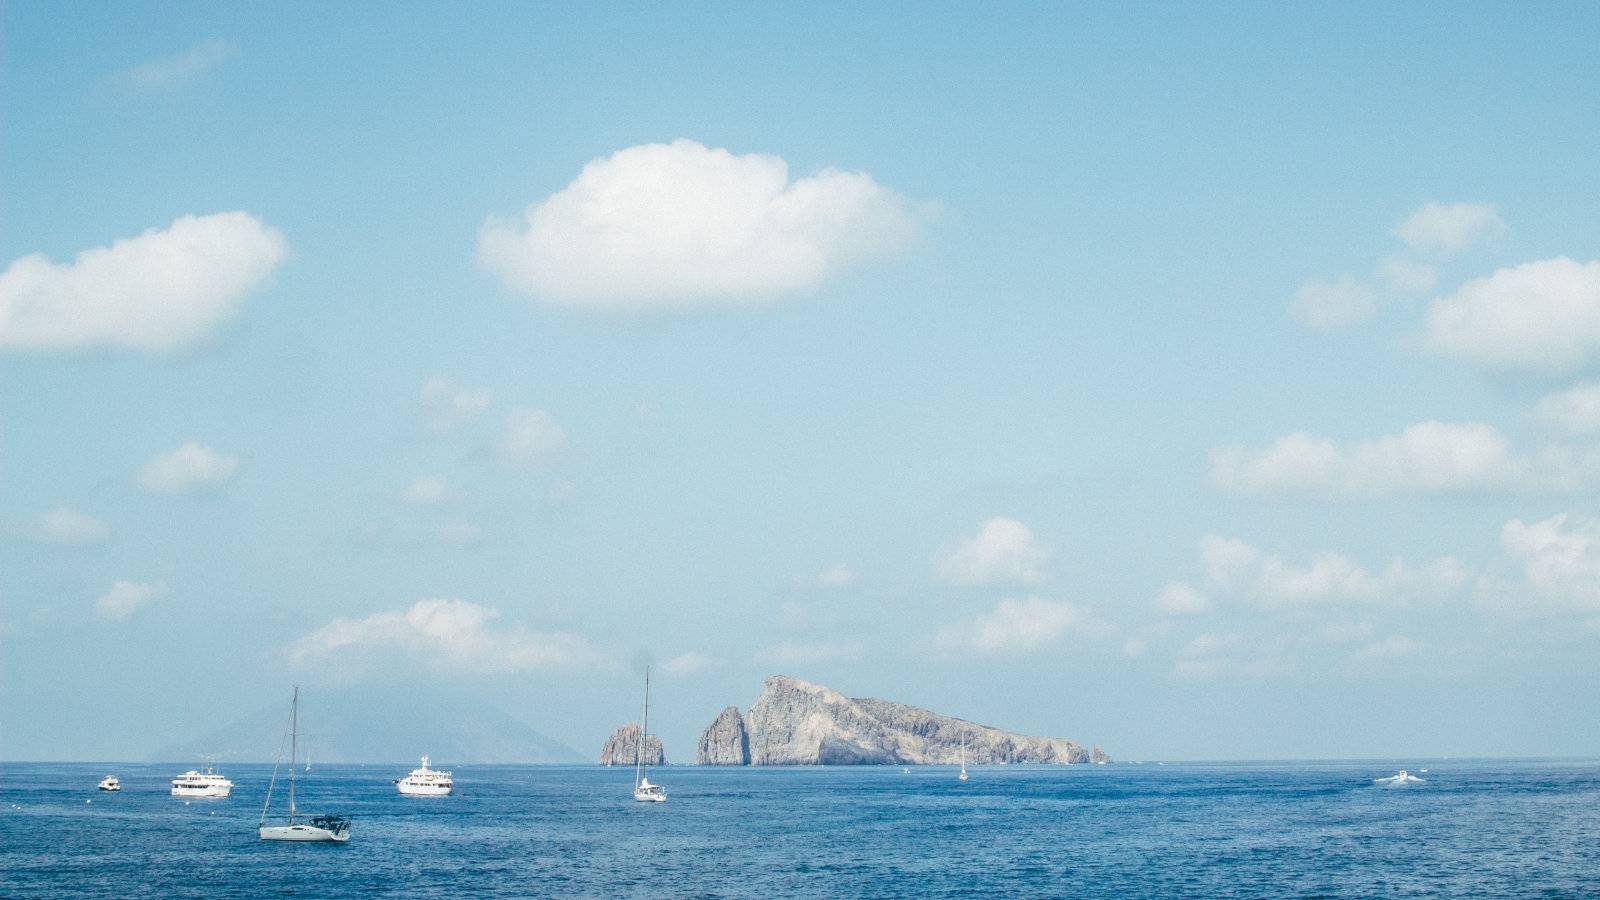 A view of yachts and a rocky outcrop on a beautiful clear day.